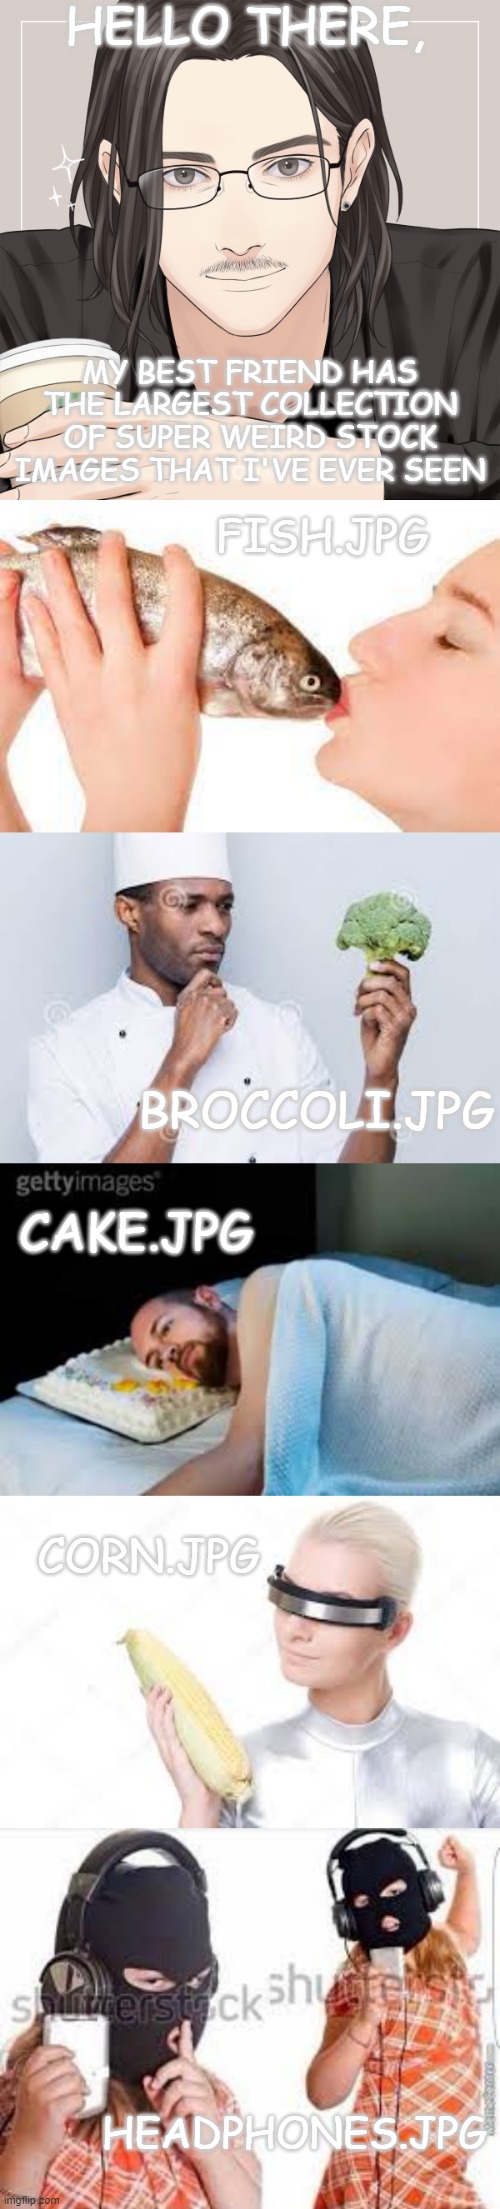 He literally has over six hundred! Here are a few of those: | HELLO THERE, MY BEST FRIEND HAS THE LARGEST COLLECTION OF SUPER WEIRD STOCK IMAGES THAT I'VE EVER SEEN; FISH.JPG; BROCCOLI.JPG; CAKE.JPG; CORN.JPG; HEADPHONES.JPG | image tagged in stock photos | made w/ Imgflip meme maker